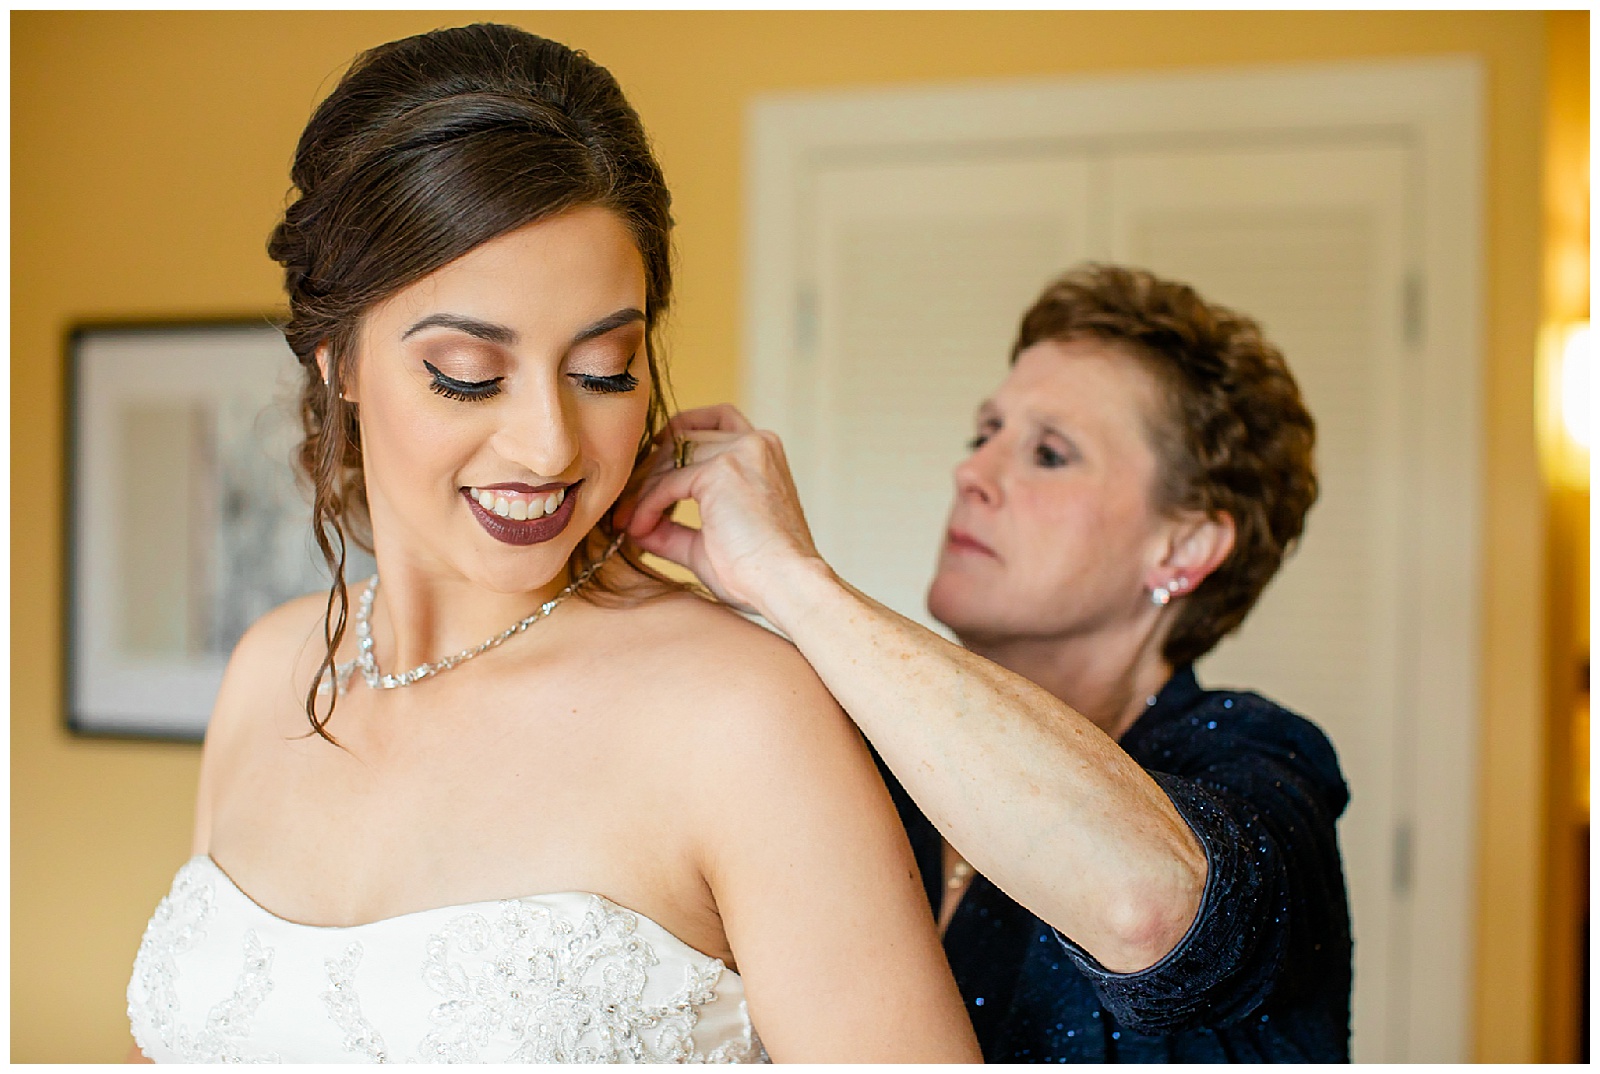 A mother helping her daughter get ready on the wedding day.